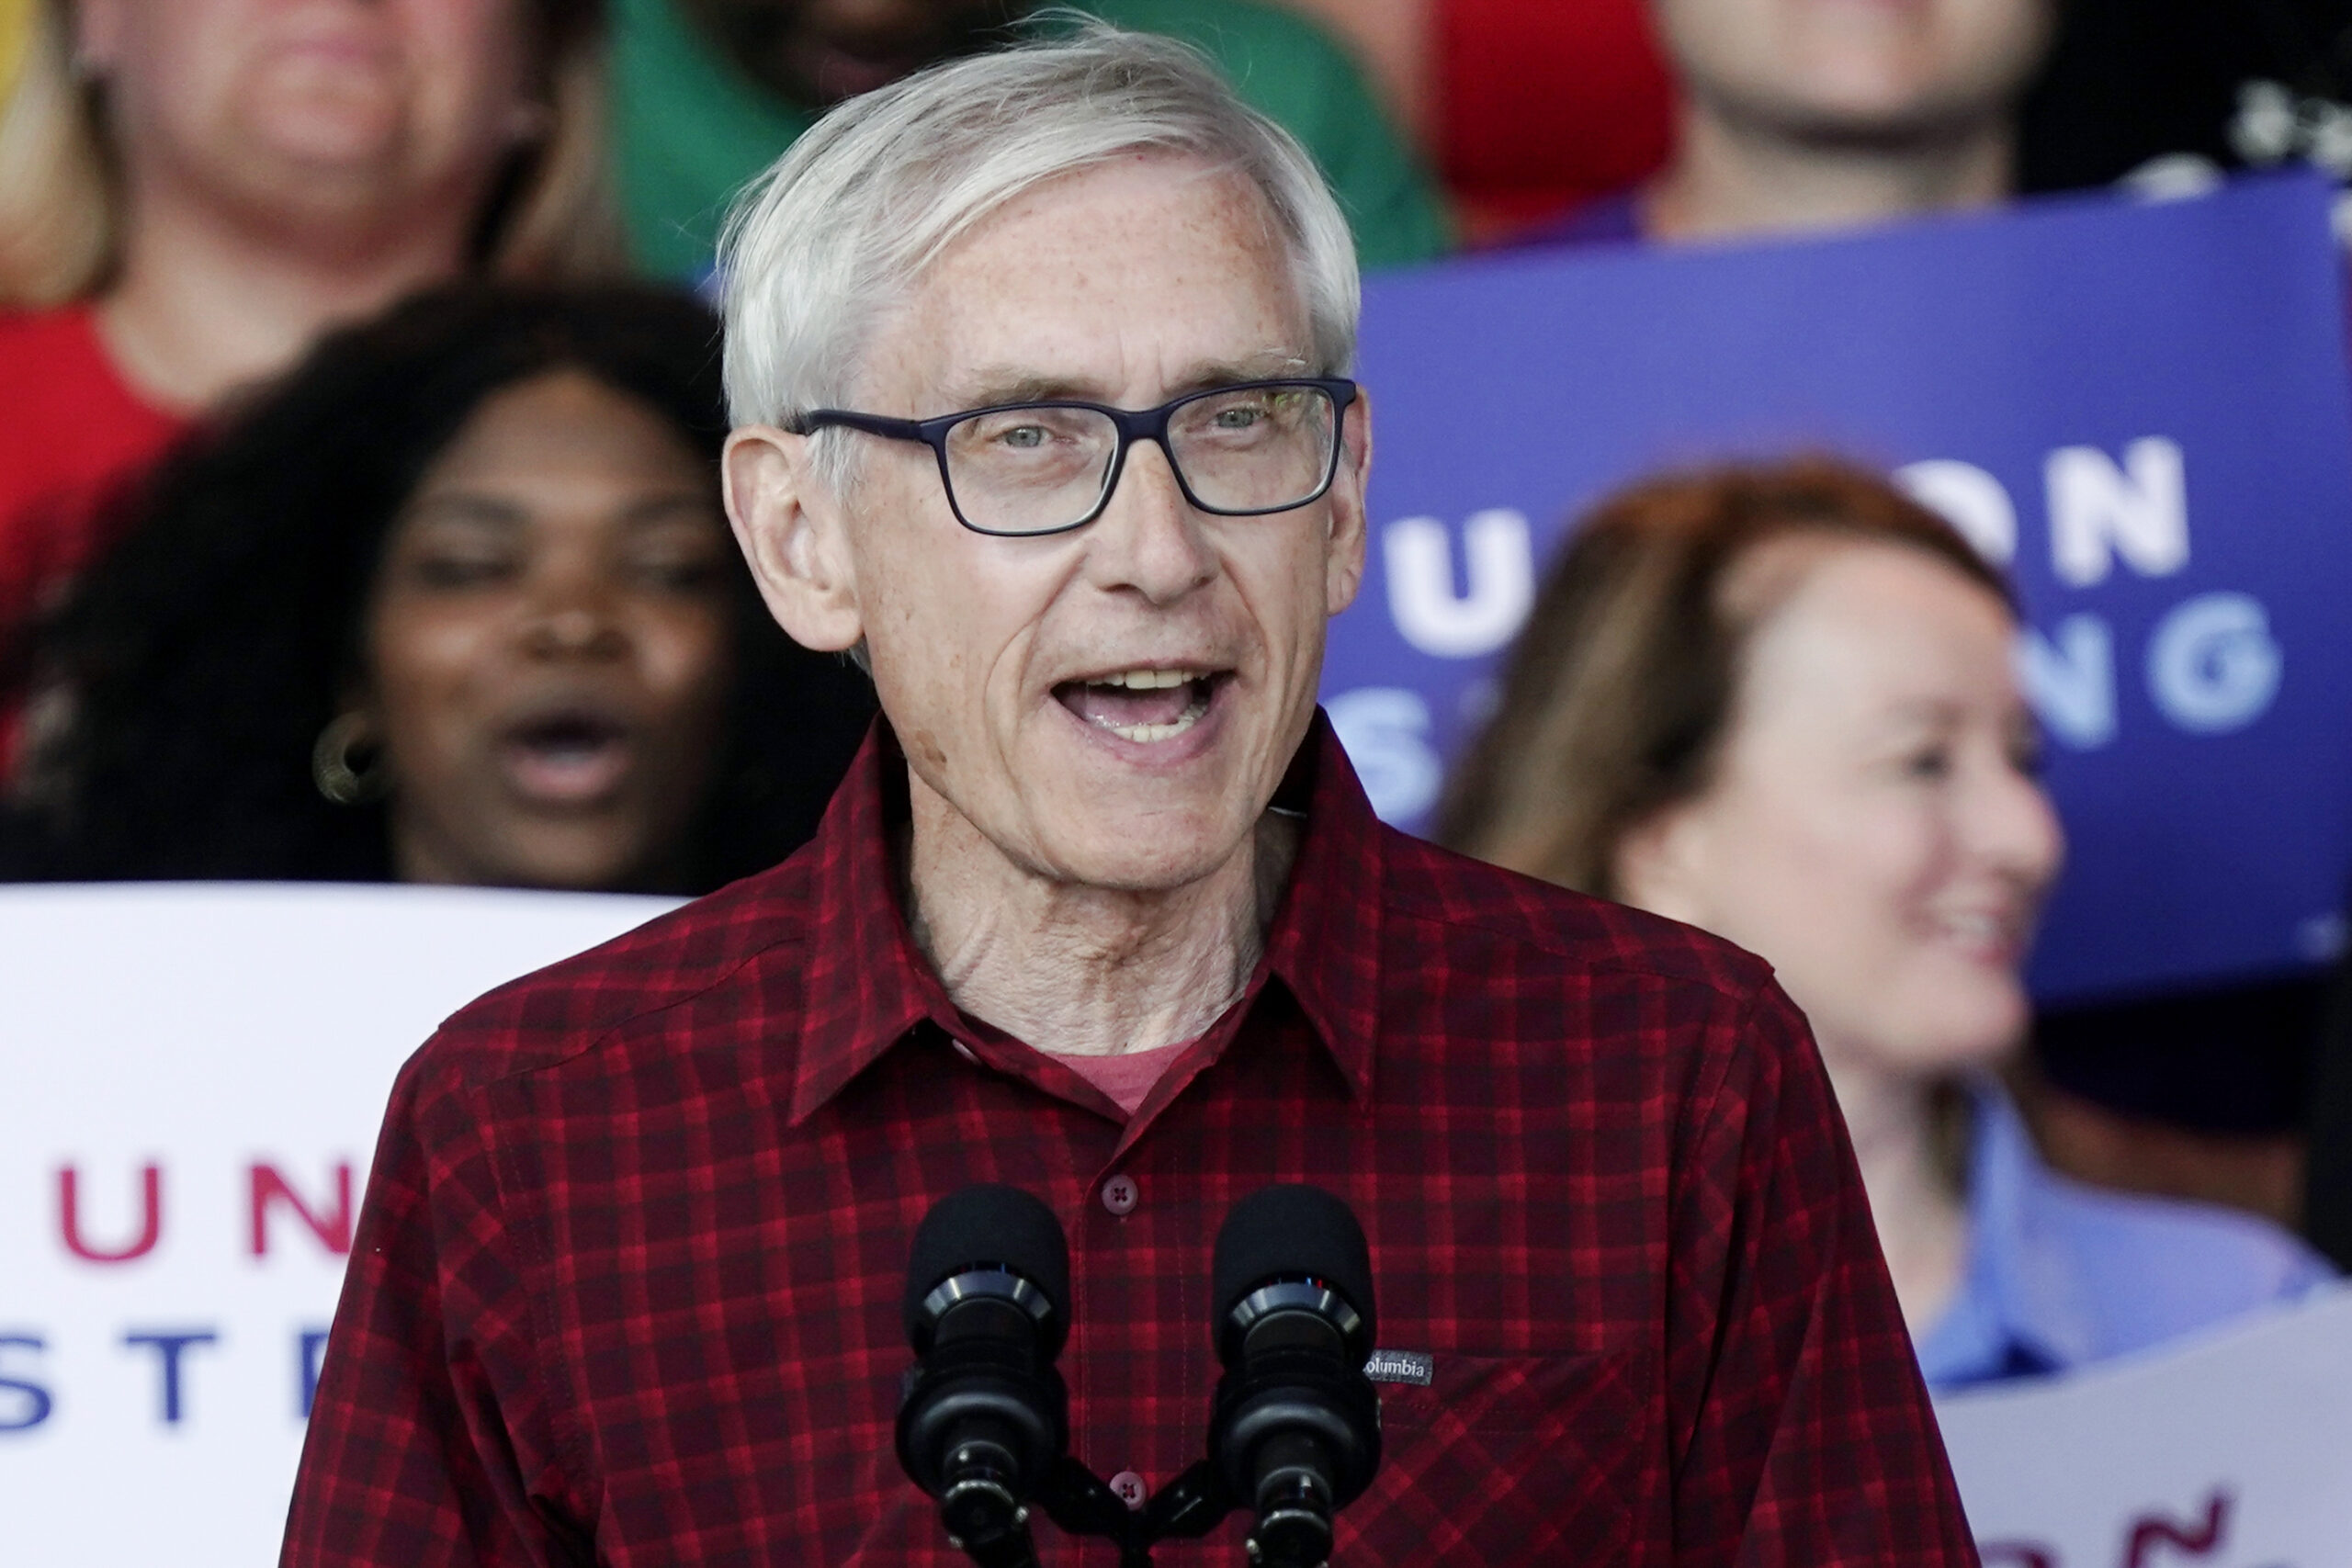 Wisconsin Gov. Tony Evers speaks during an event.